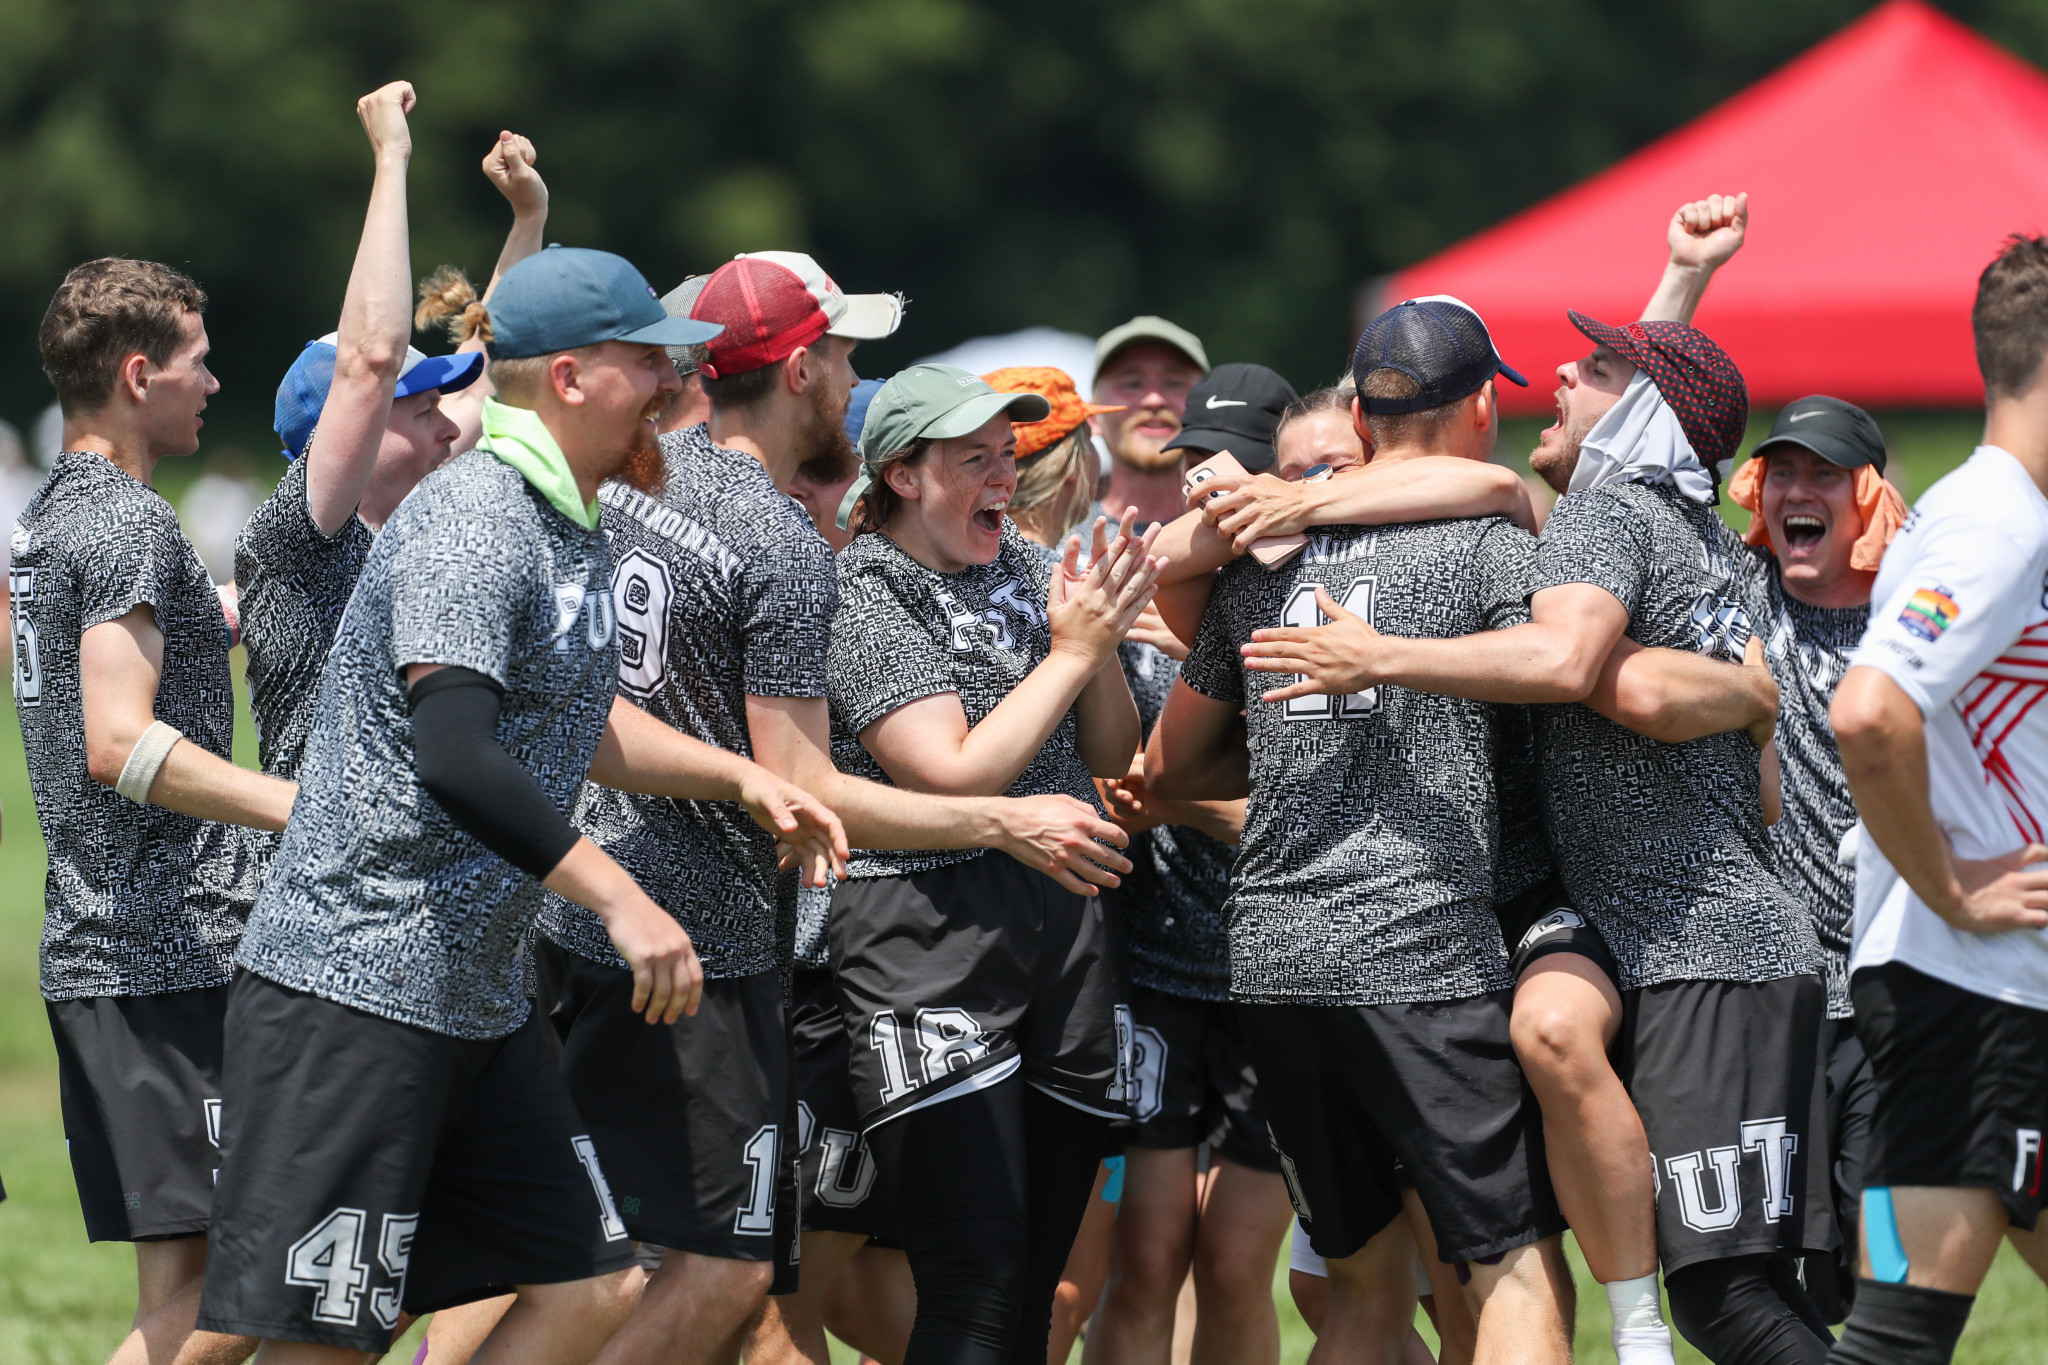 Pussin Tiristäjät edge past Reading Ultimate in thriller at World Ultimate Club Championships